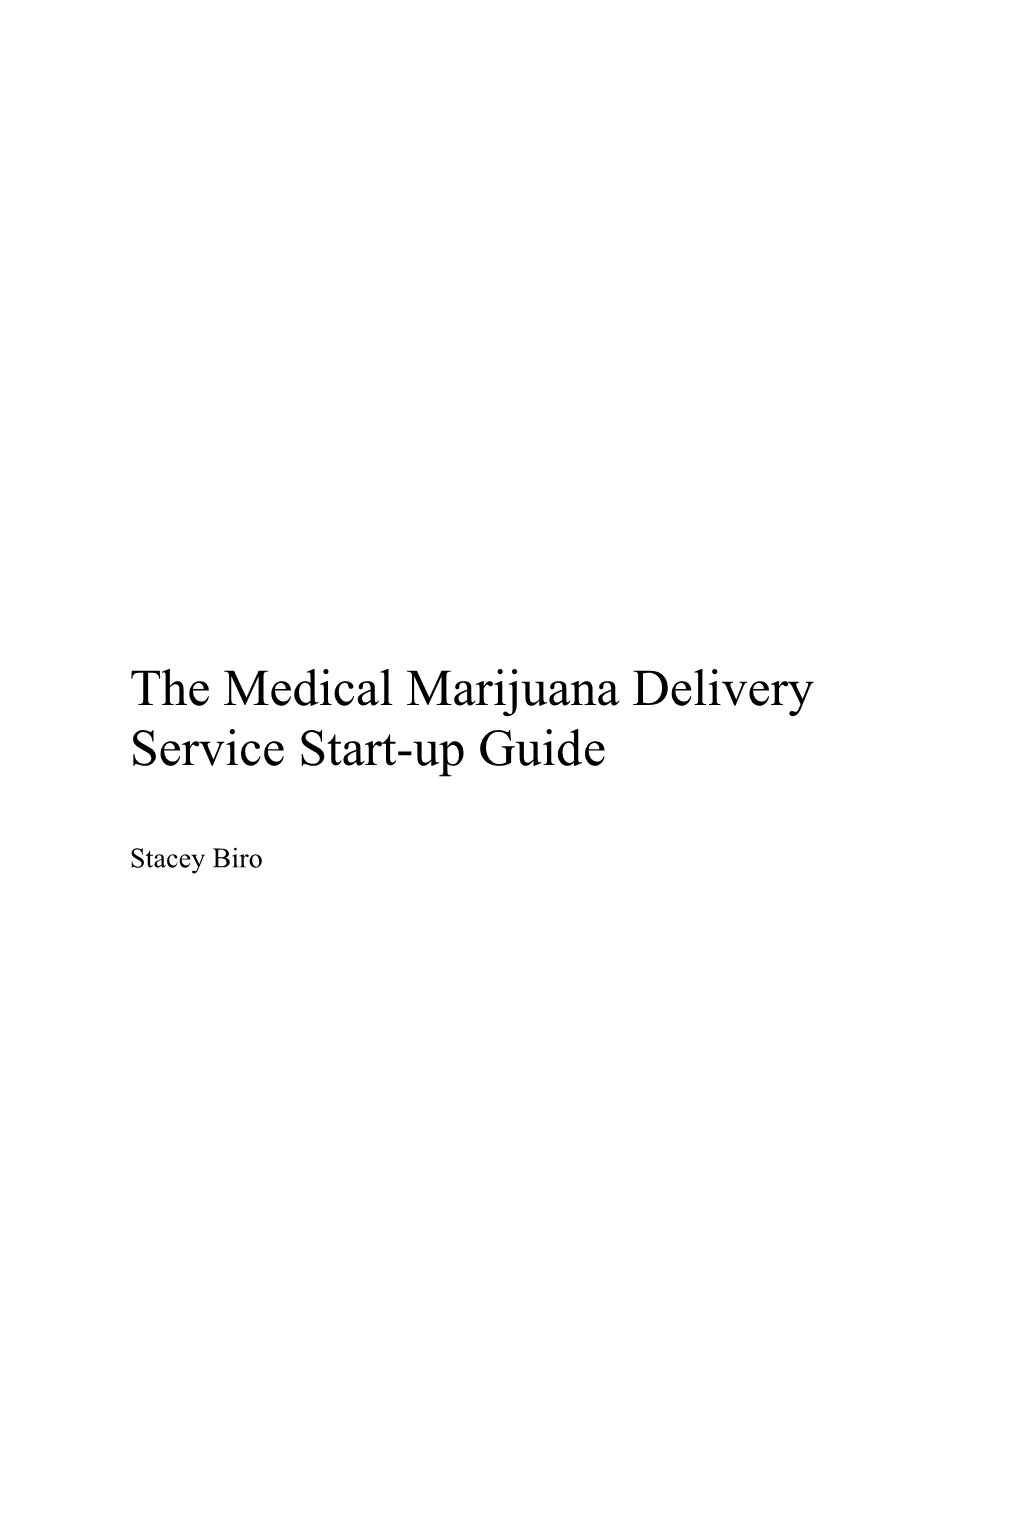 The Medical Marijuana Delivery Service Start-Up Guide